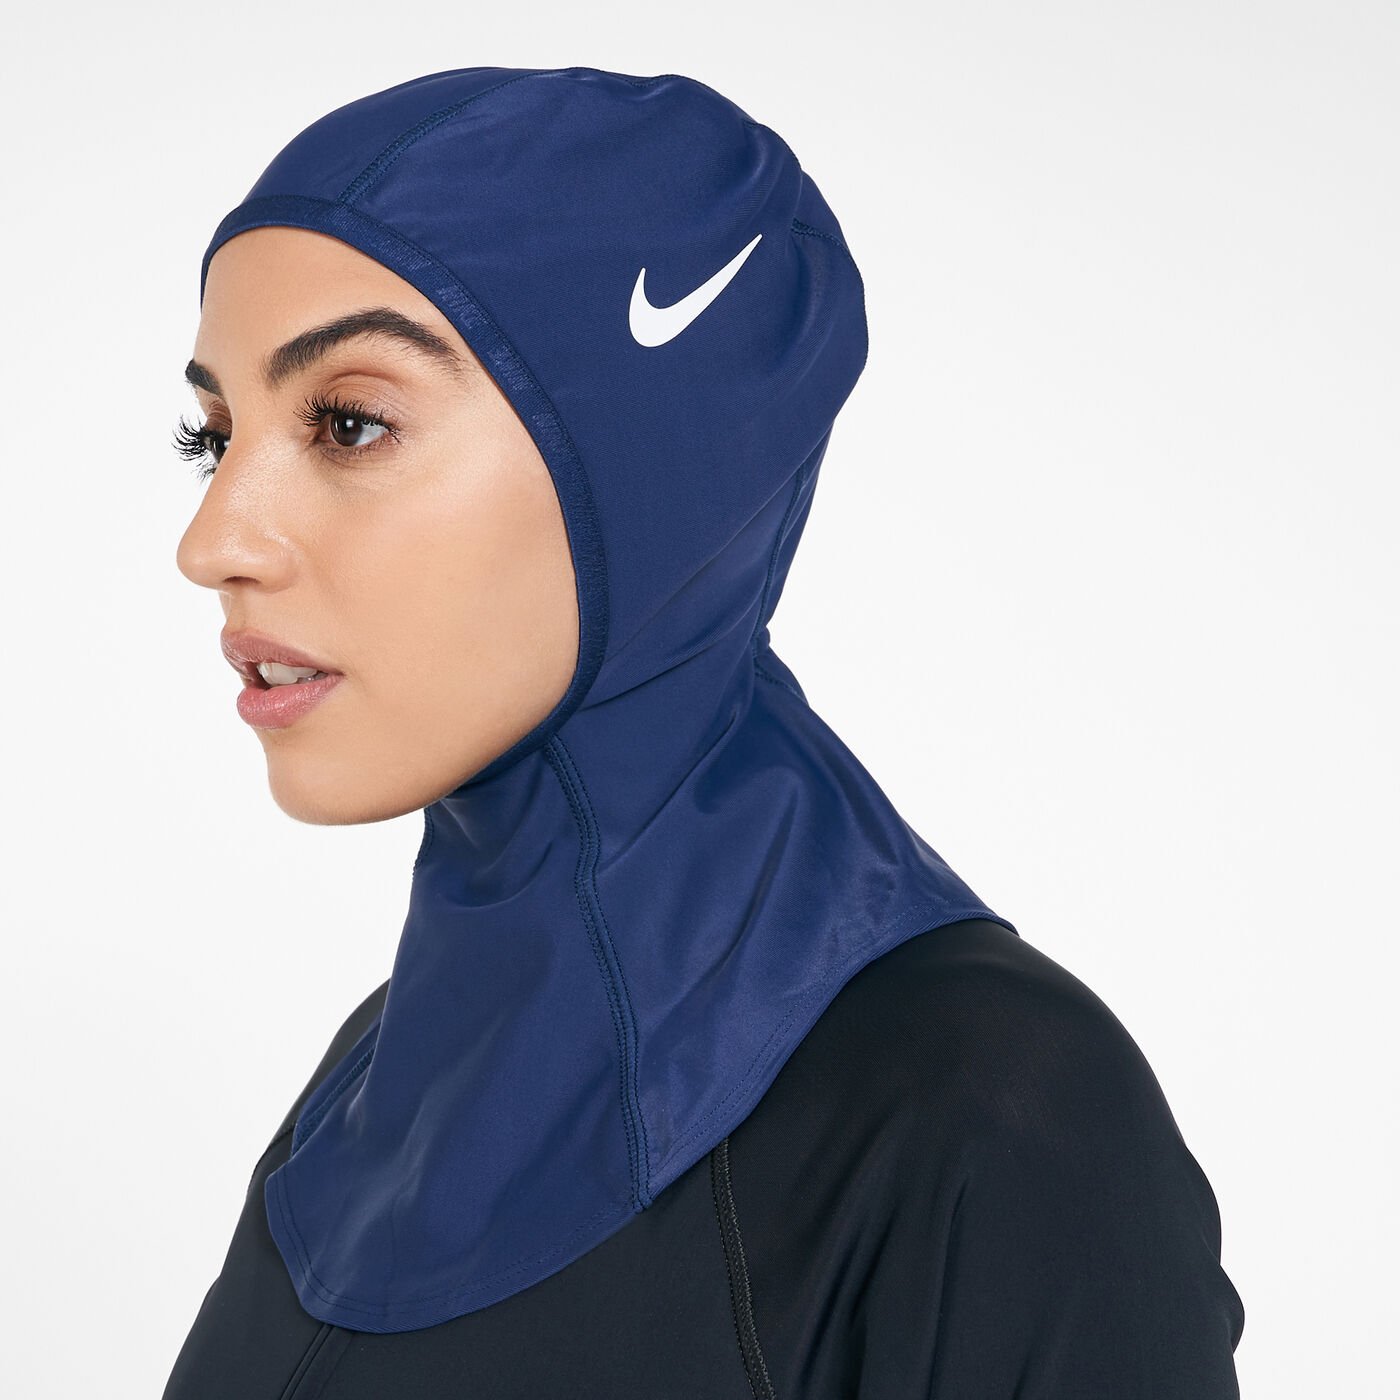 Women's Victory One Swimming Hijab